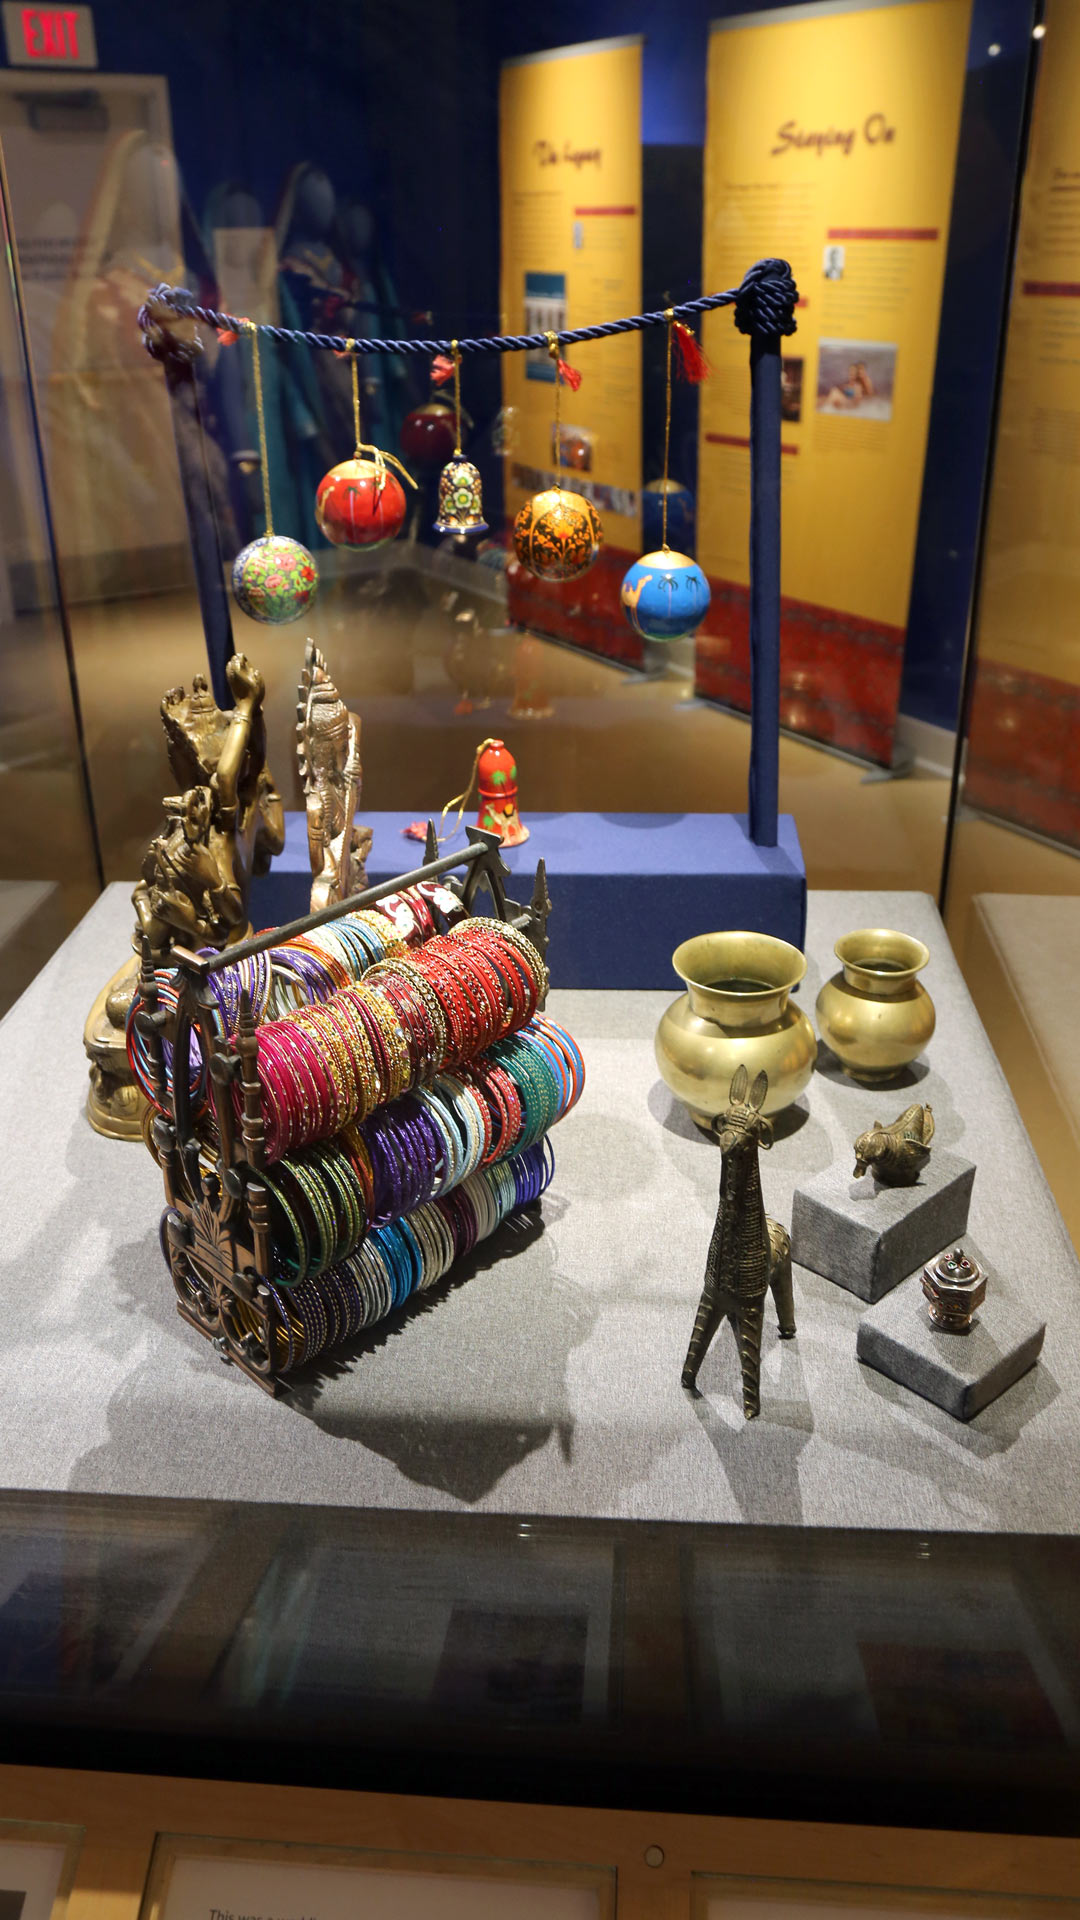 close-up of more jewelry bands and small sculptures of animals and pots